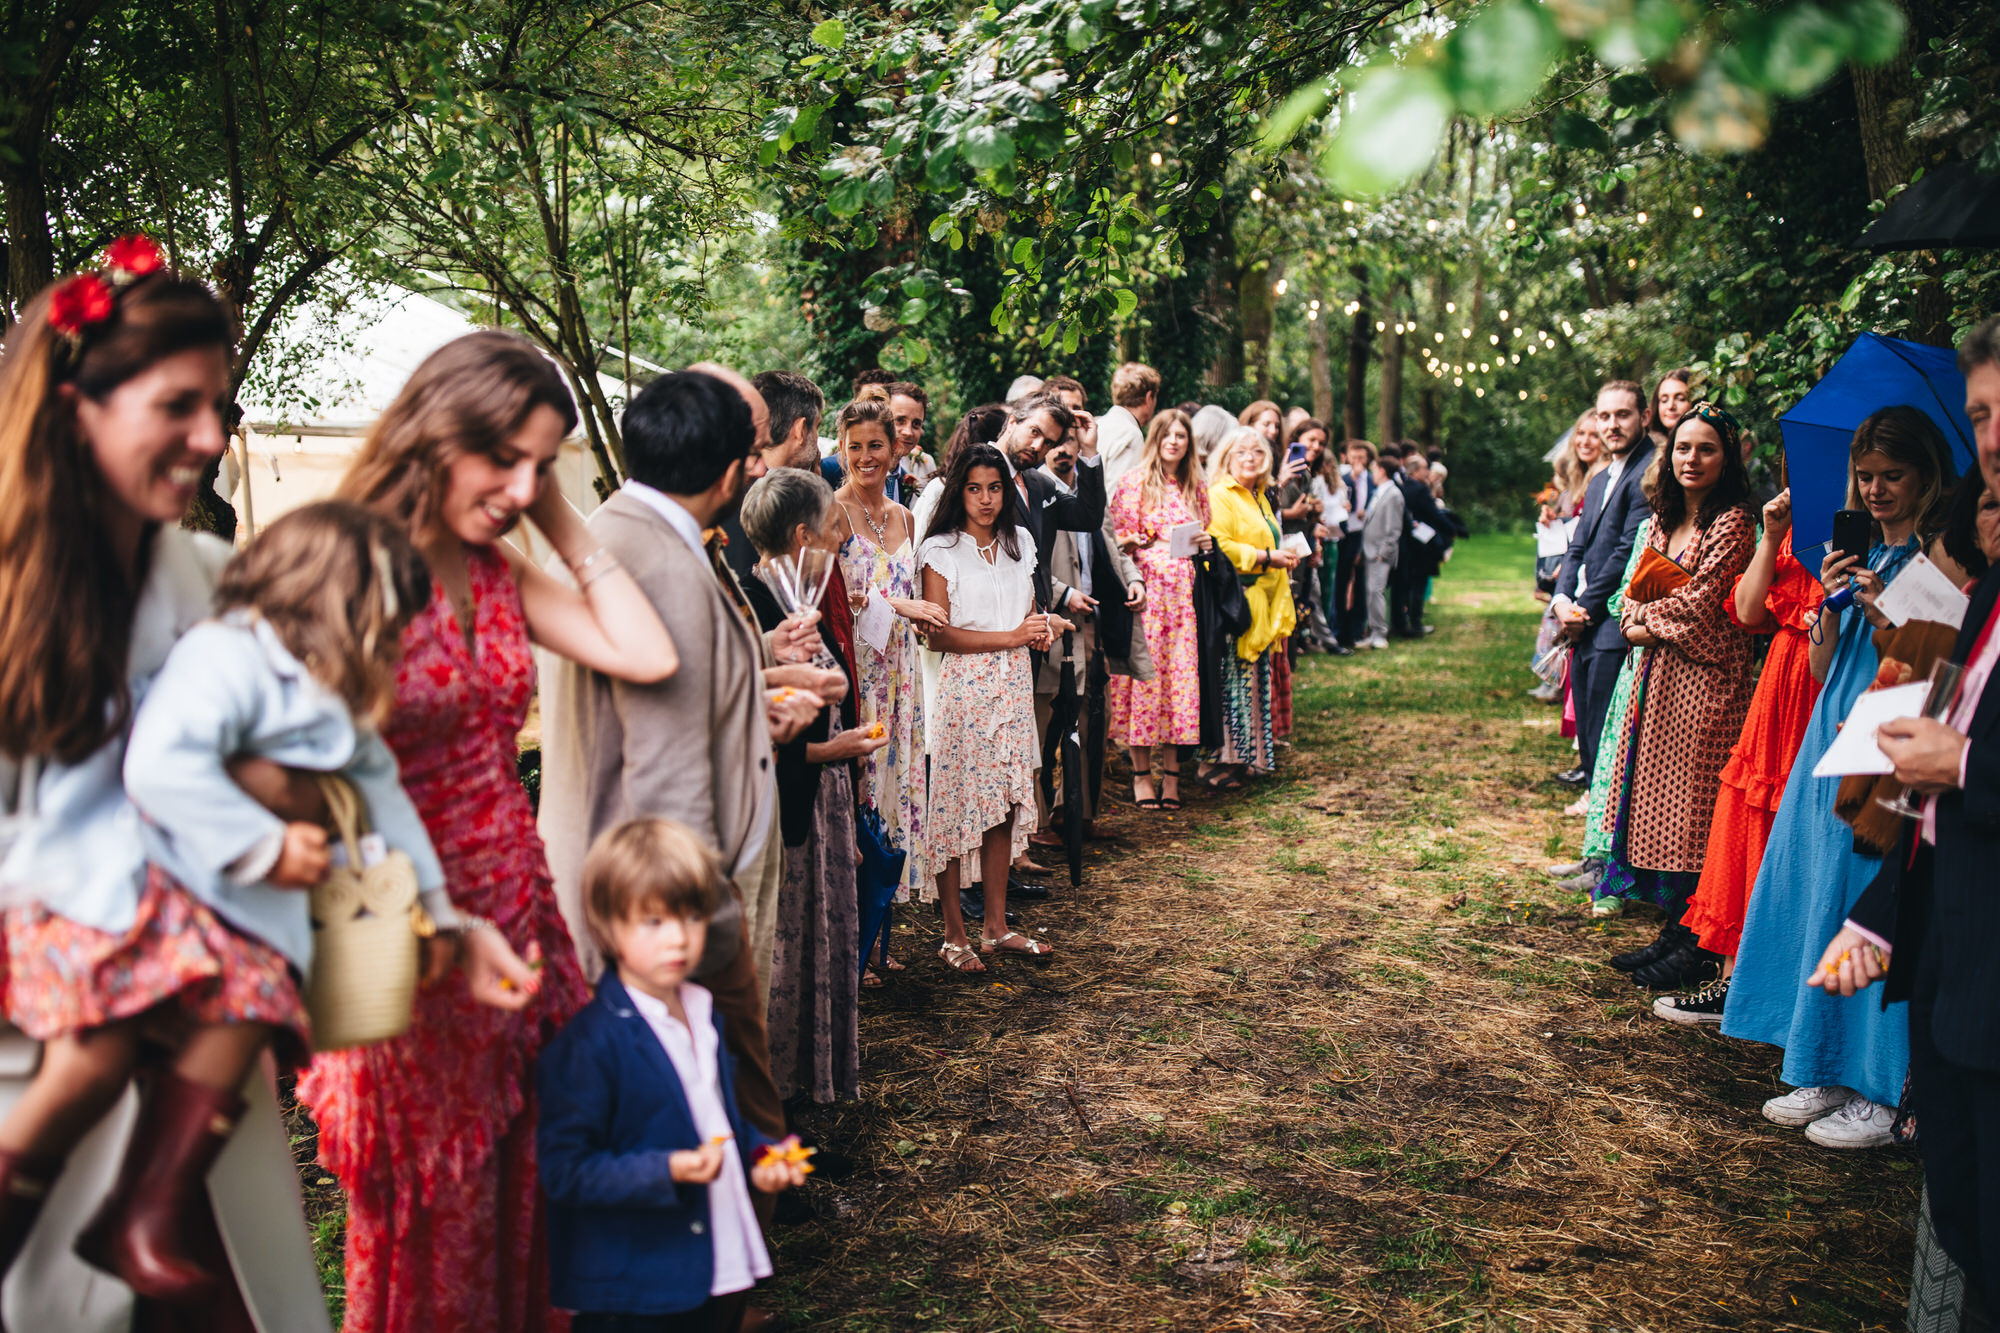 guests waiting in a line through trees